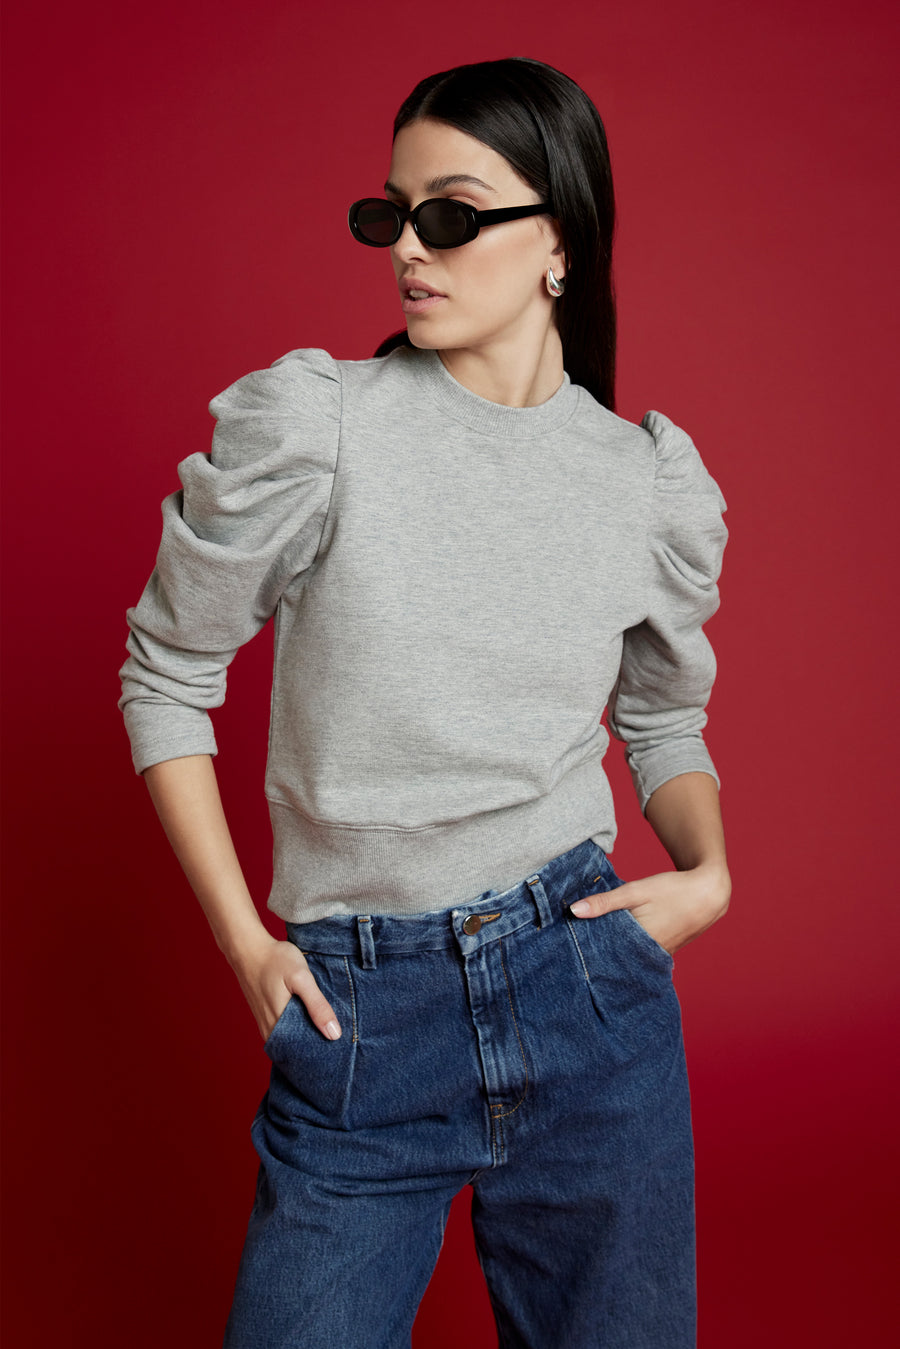 The Just Enough Puff Sweatshirt in Heather Grey